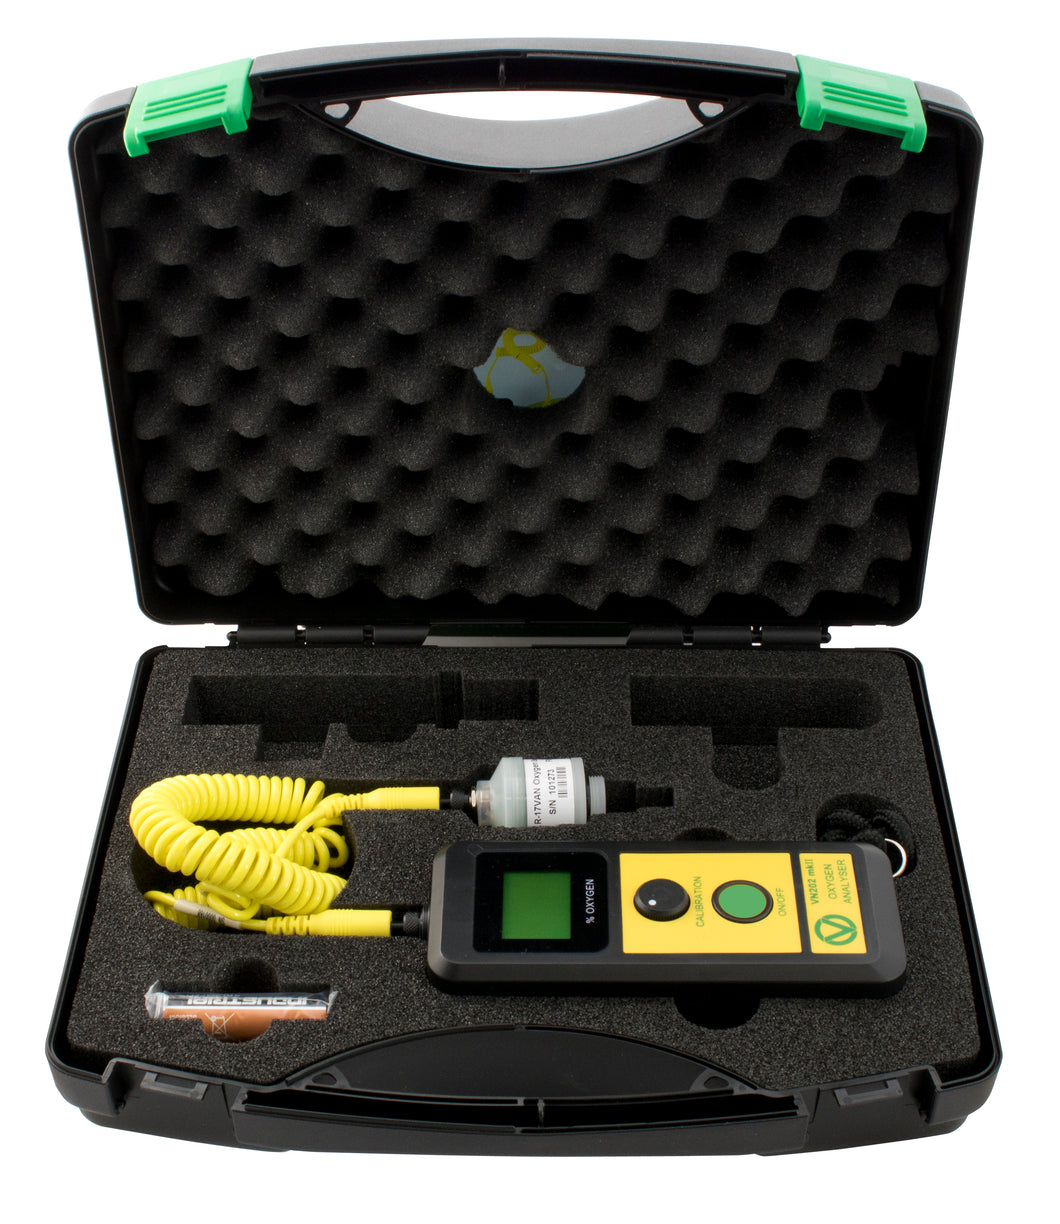 VN202 mkII Diving Analyser - Non Auto-Switch off (7910110)